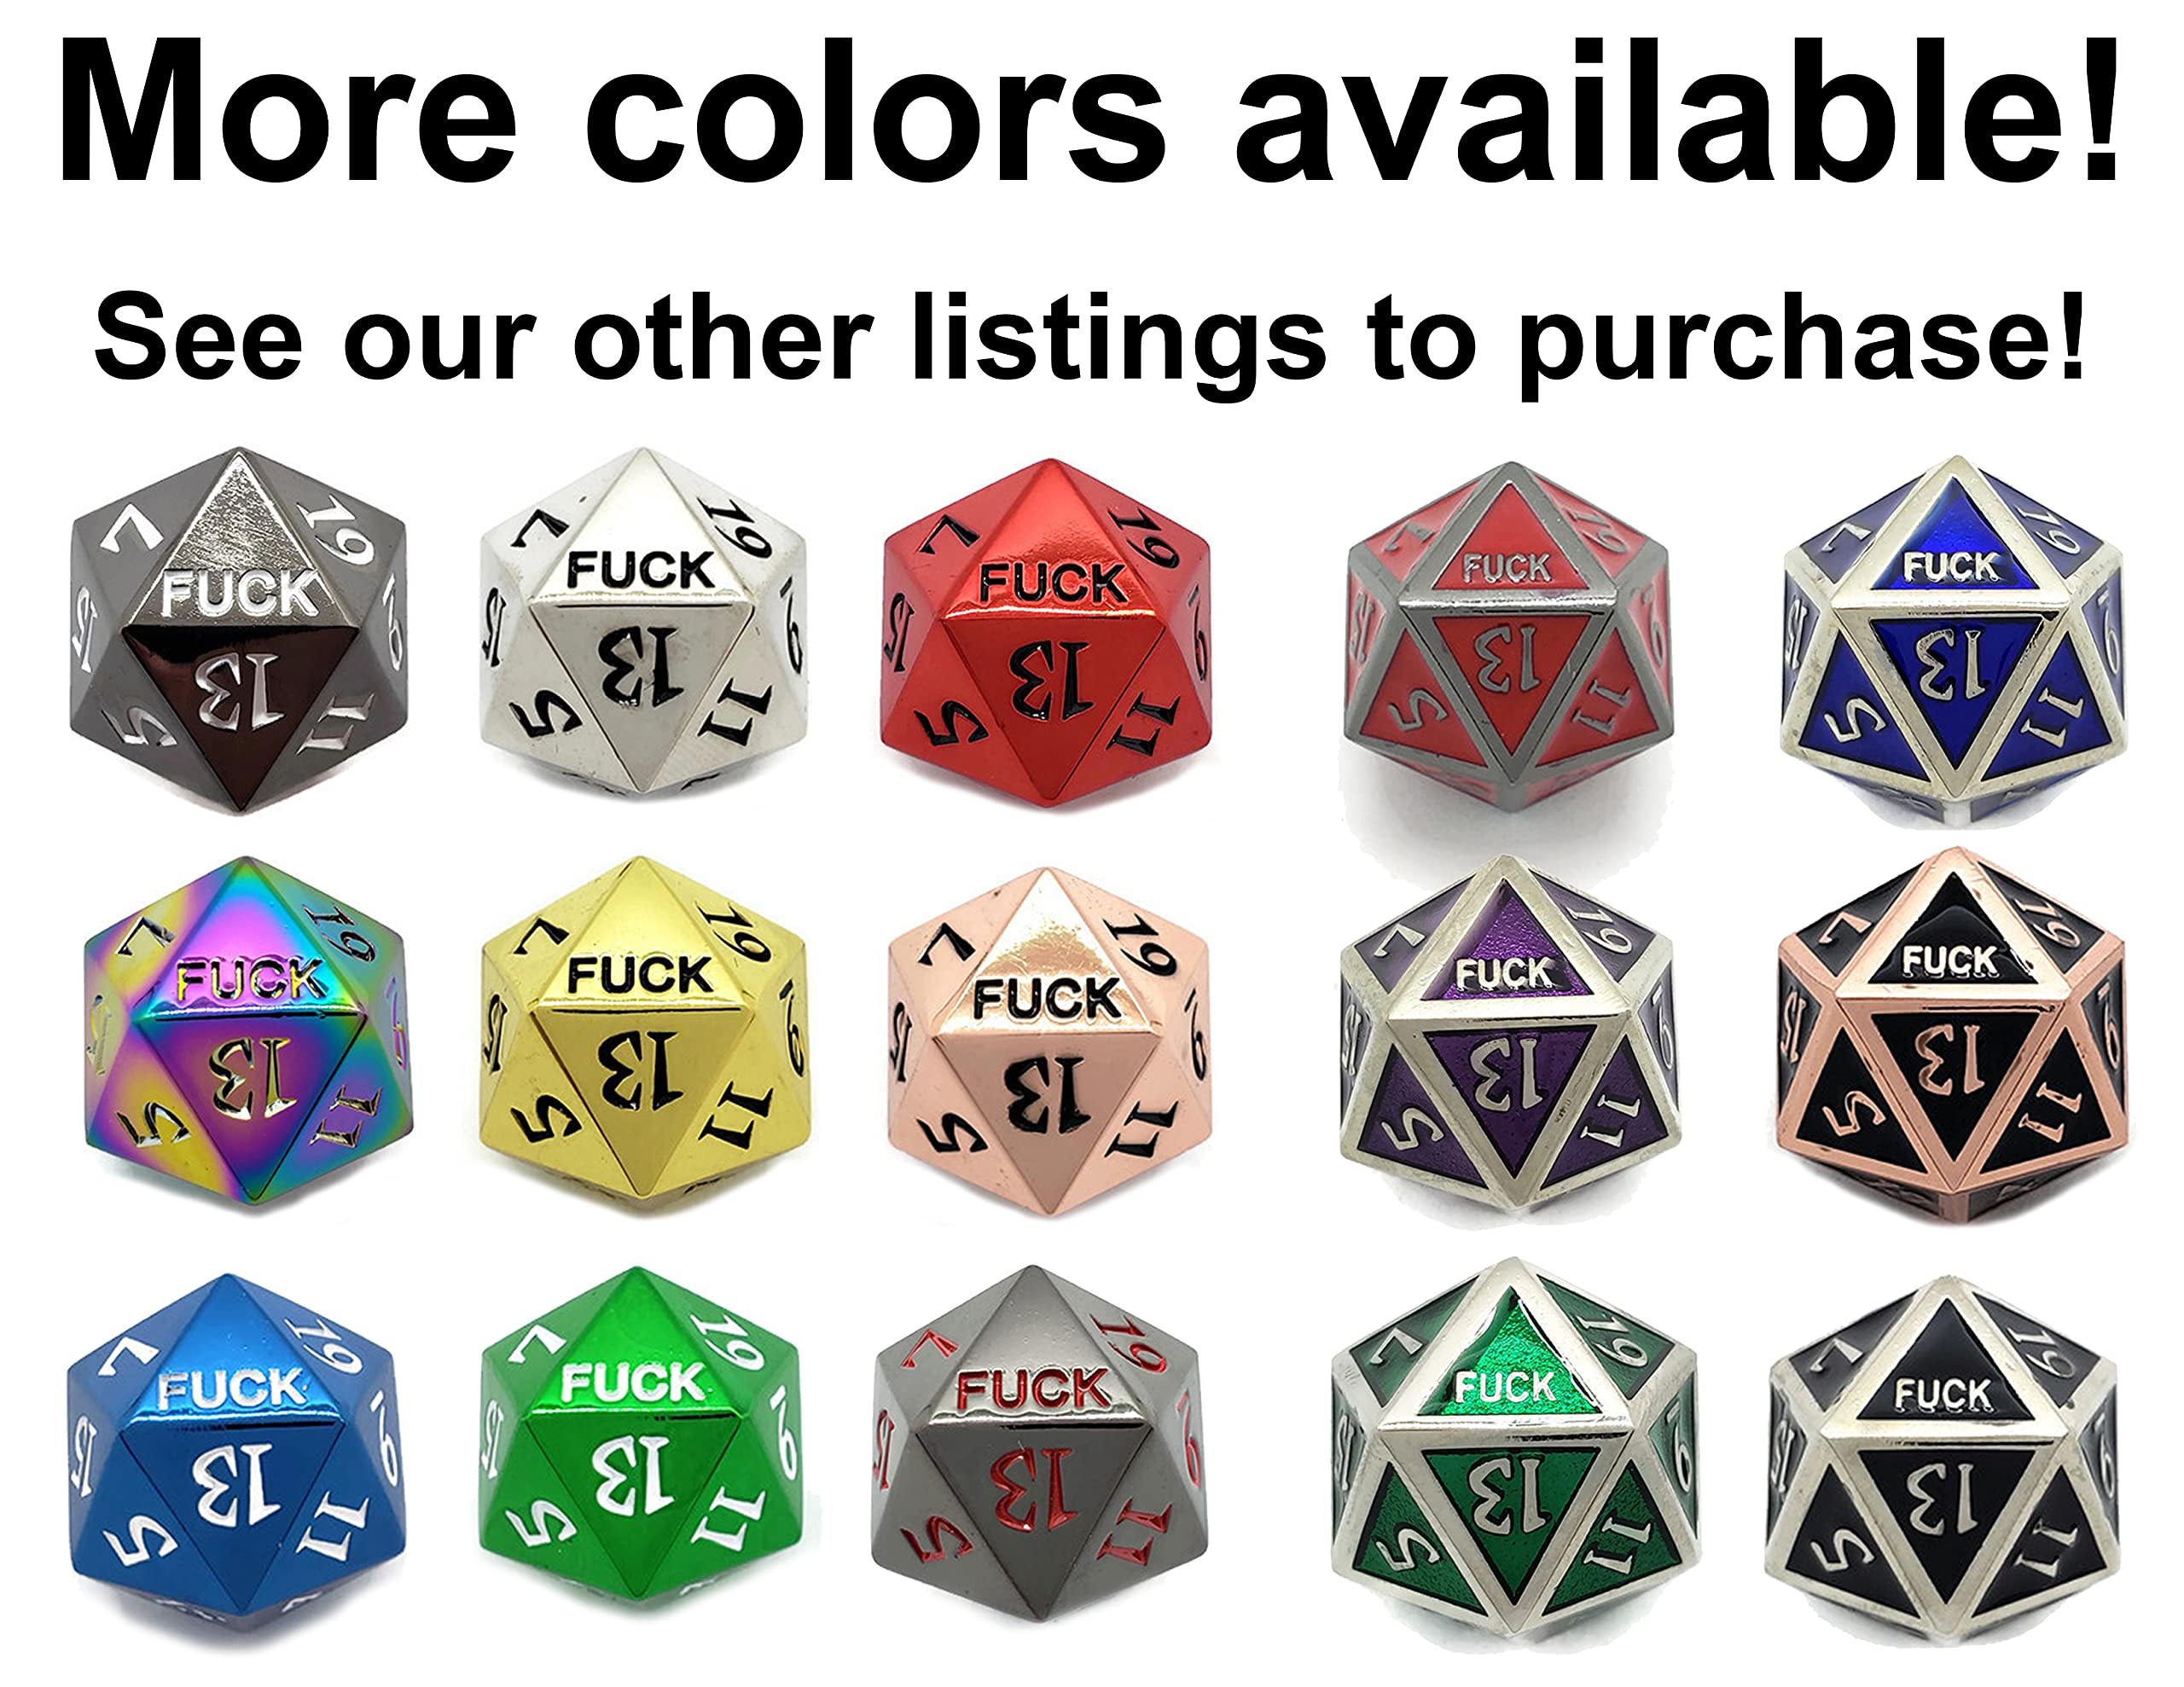 Metal D20 Fuck Dice Critical Fail F 20 Sided Die Set DND Black Gunmetal Color Number for Role Playing Game Dungeons and Dragons D&D Pathfinder Shadowrun and Math Teaching